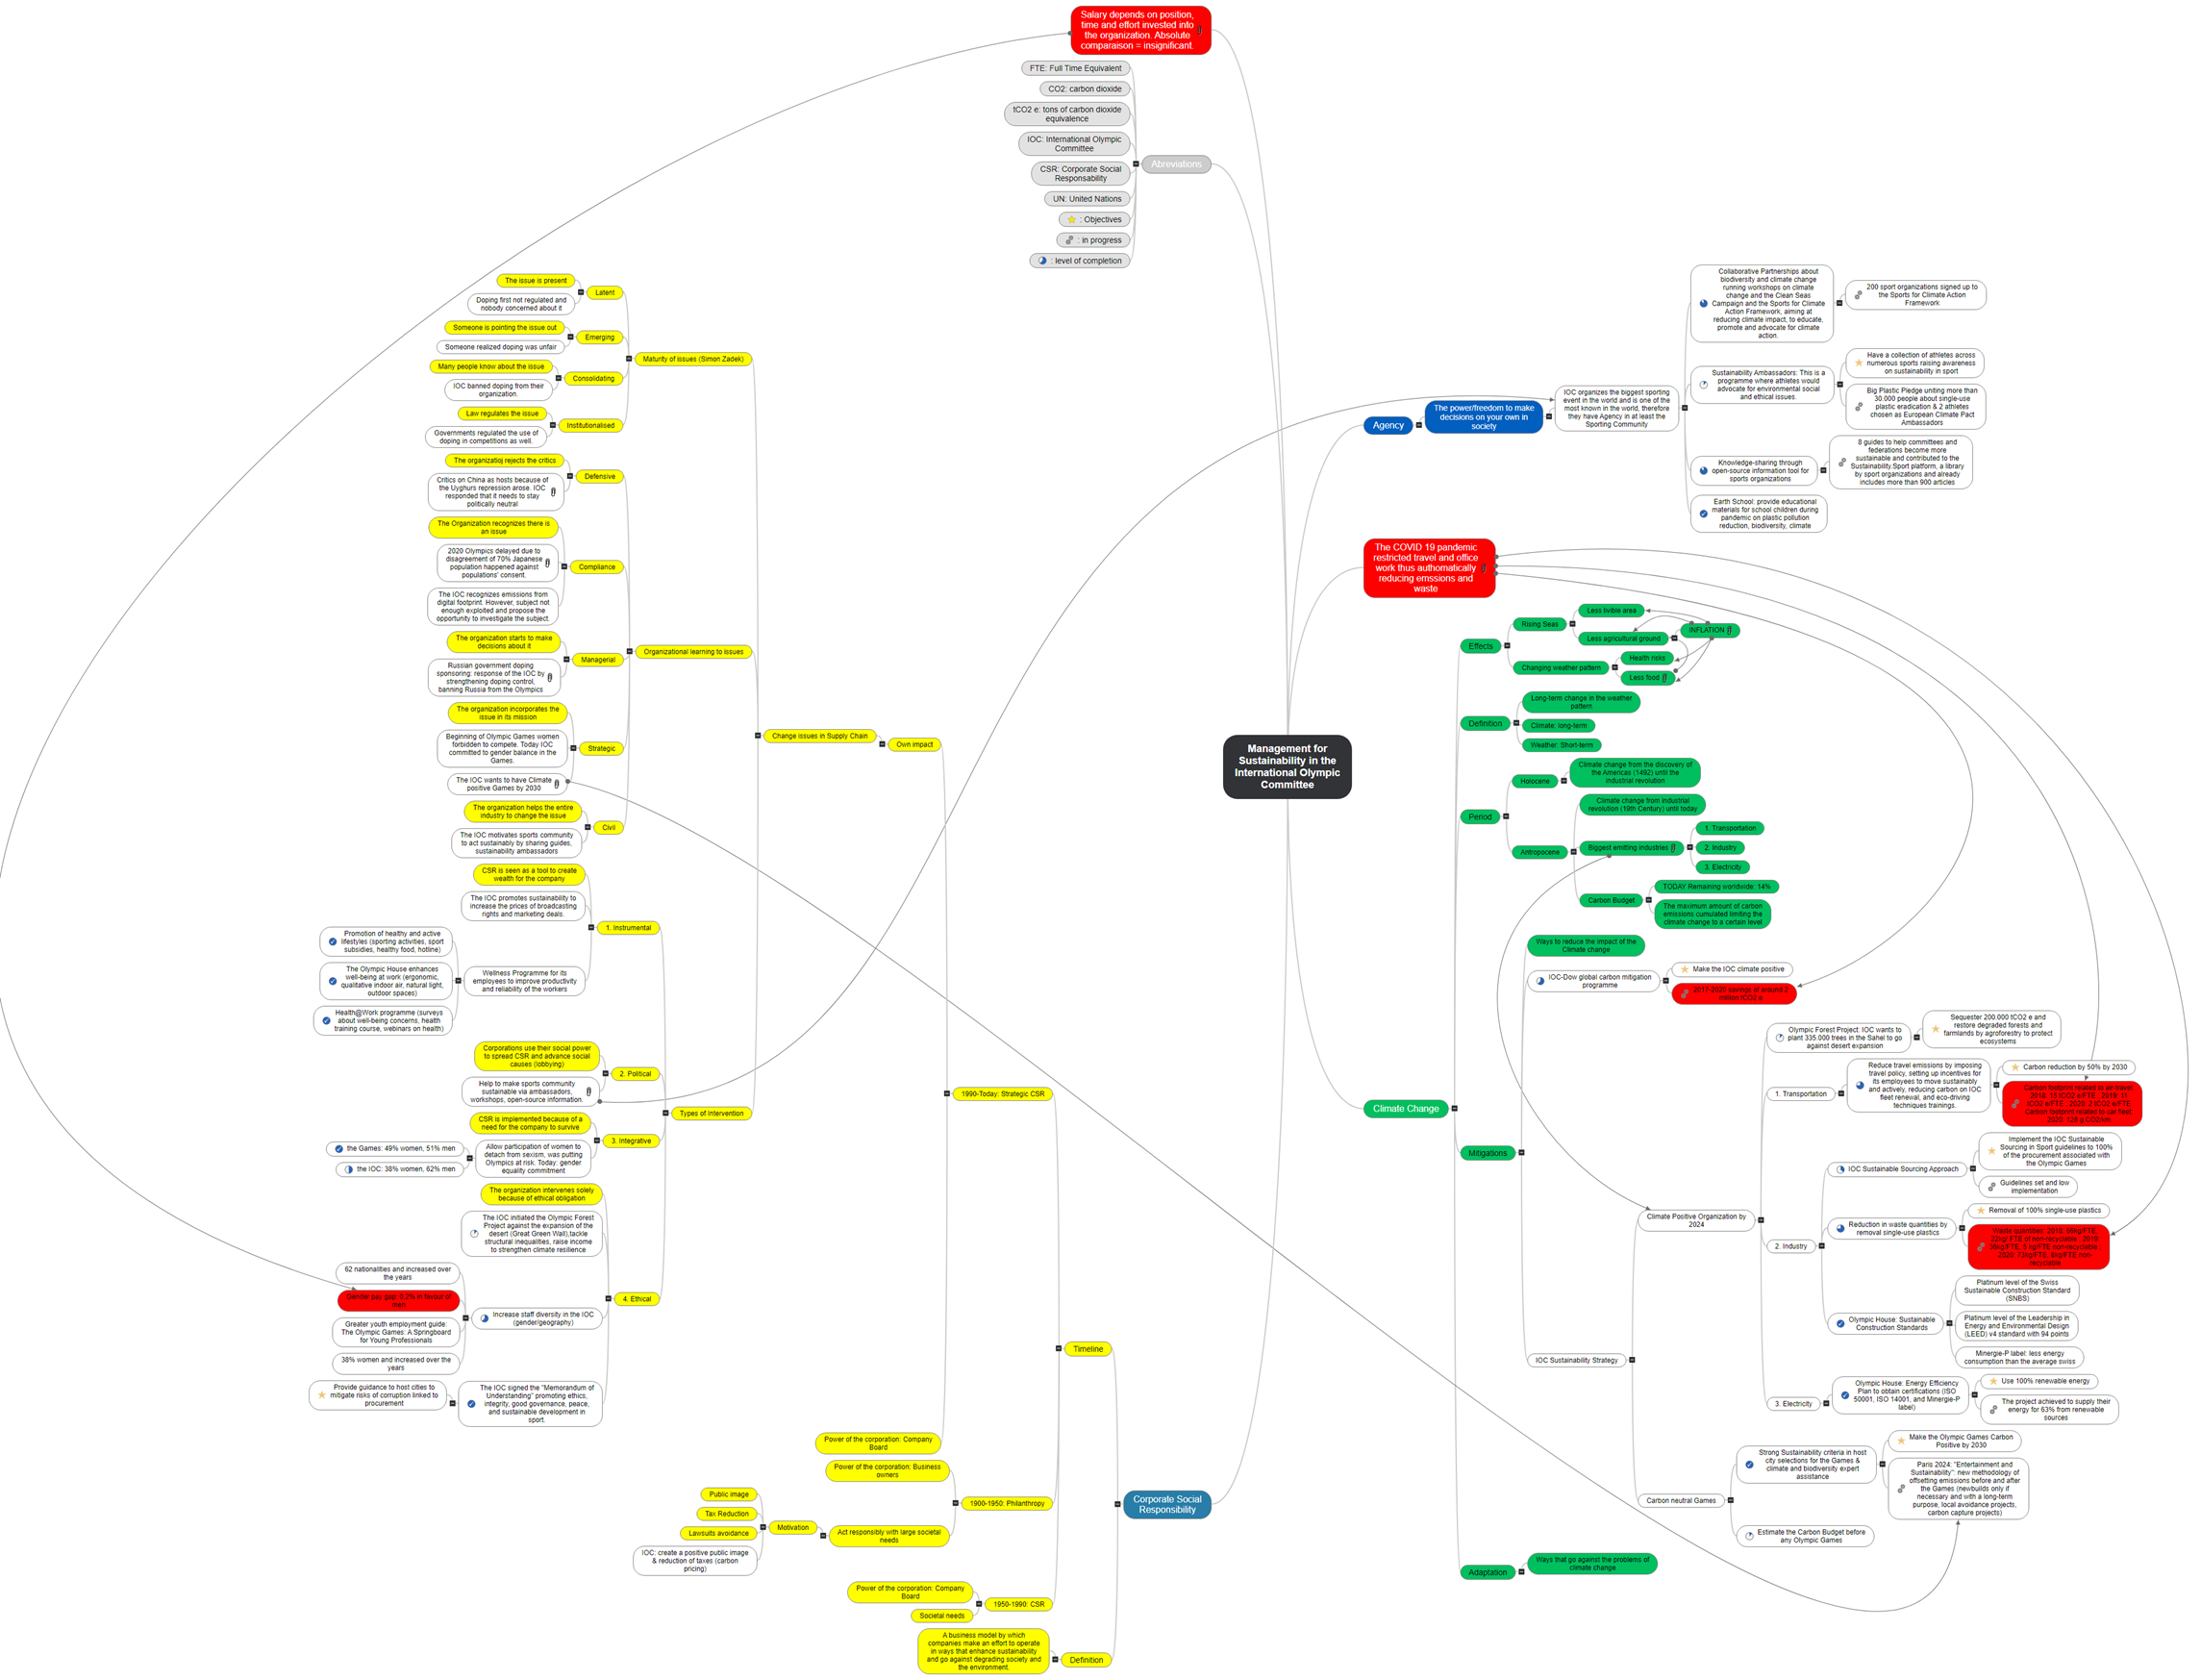 Management for Sustainability in the International Olympic Committee1 Mind Map